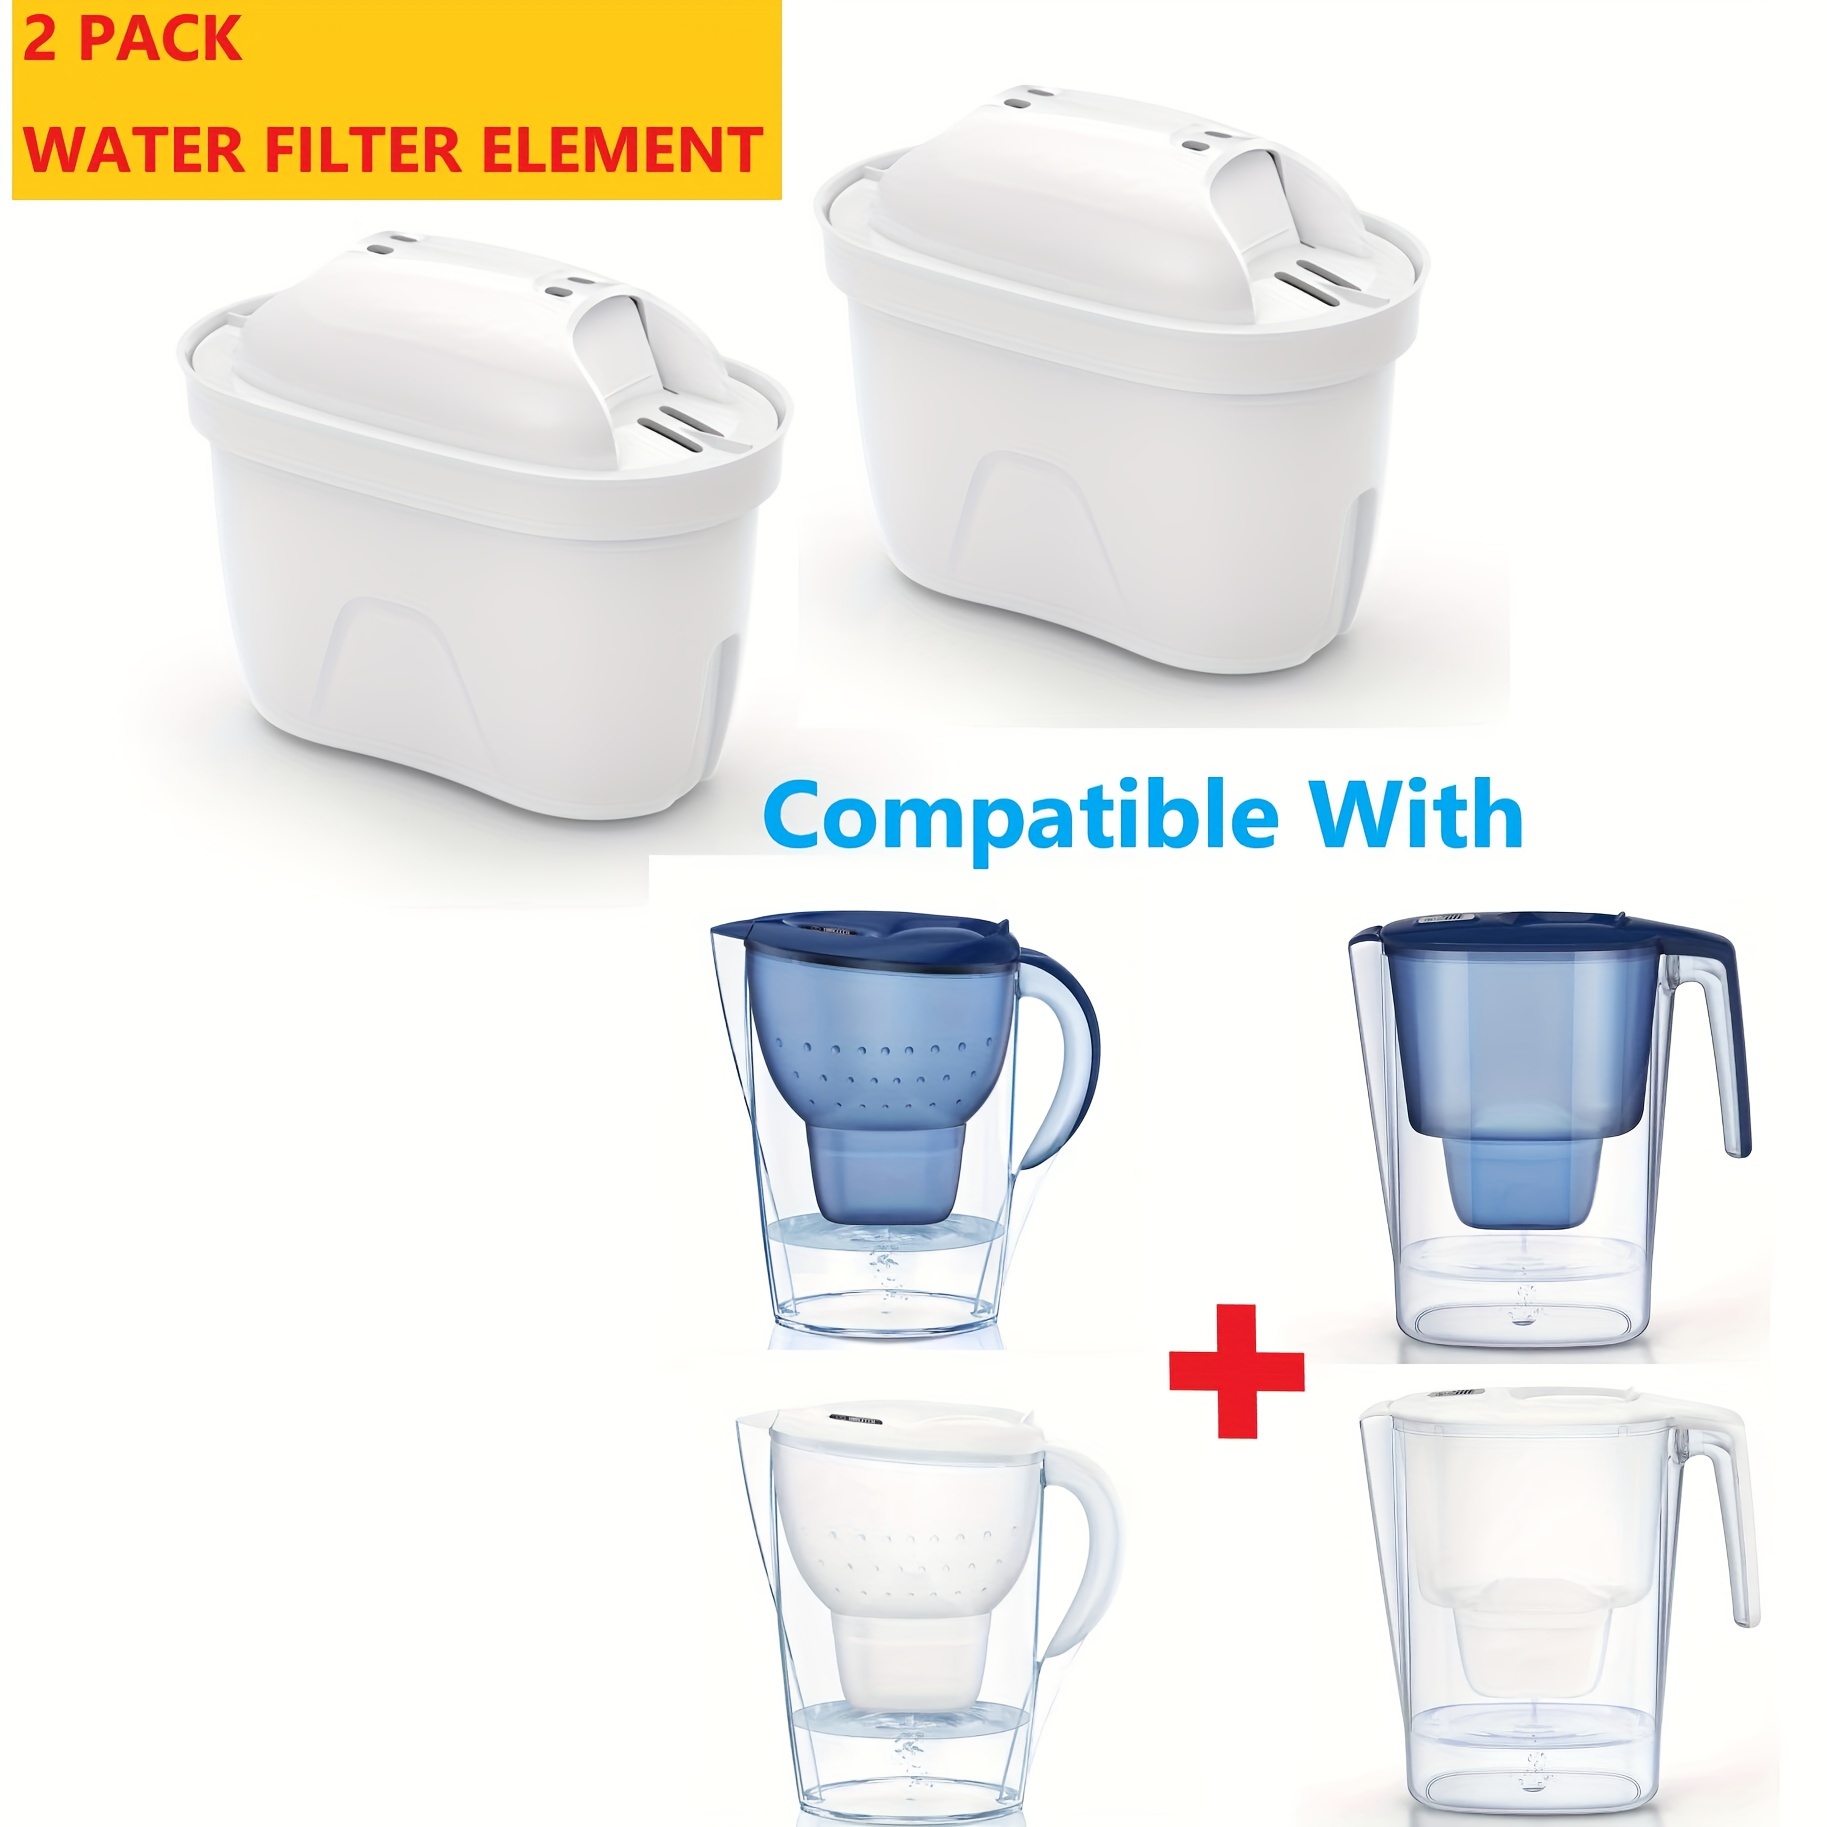 

2 -pack Water Filter Element For Home Use Office